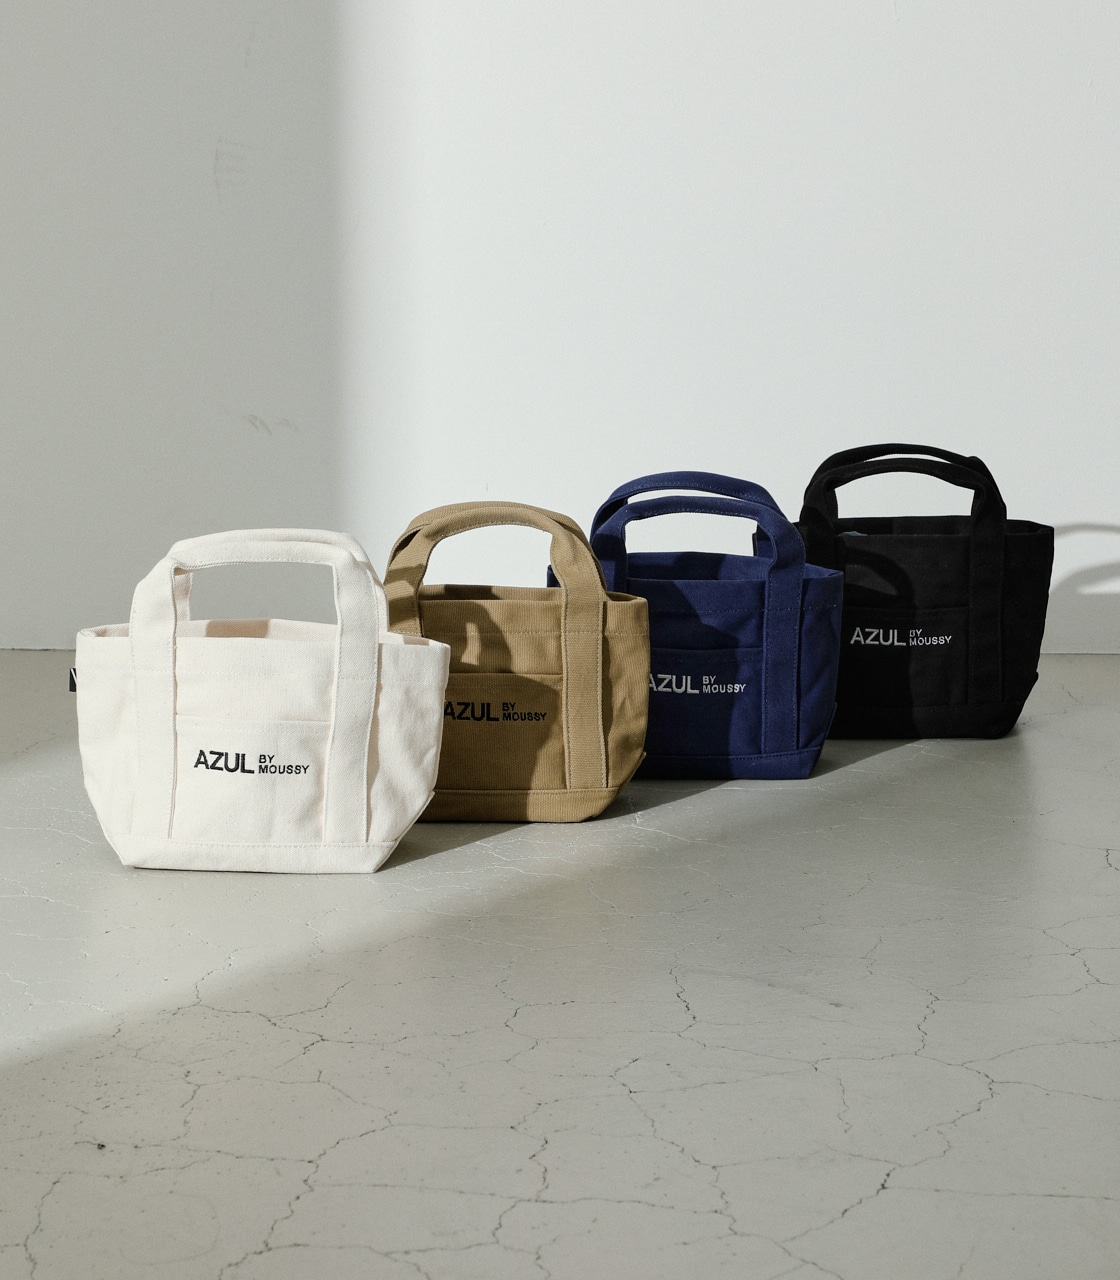 AZUL CANVAS MINI TOTE BAG/AZULキャンバスミニトートバッグ｜AZUL BY MOUSSY（アズール バイマウジー）公式通販サイト